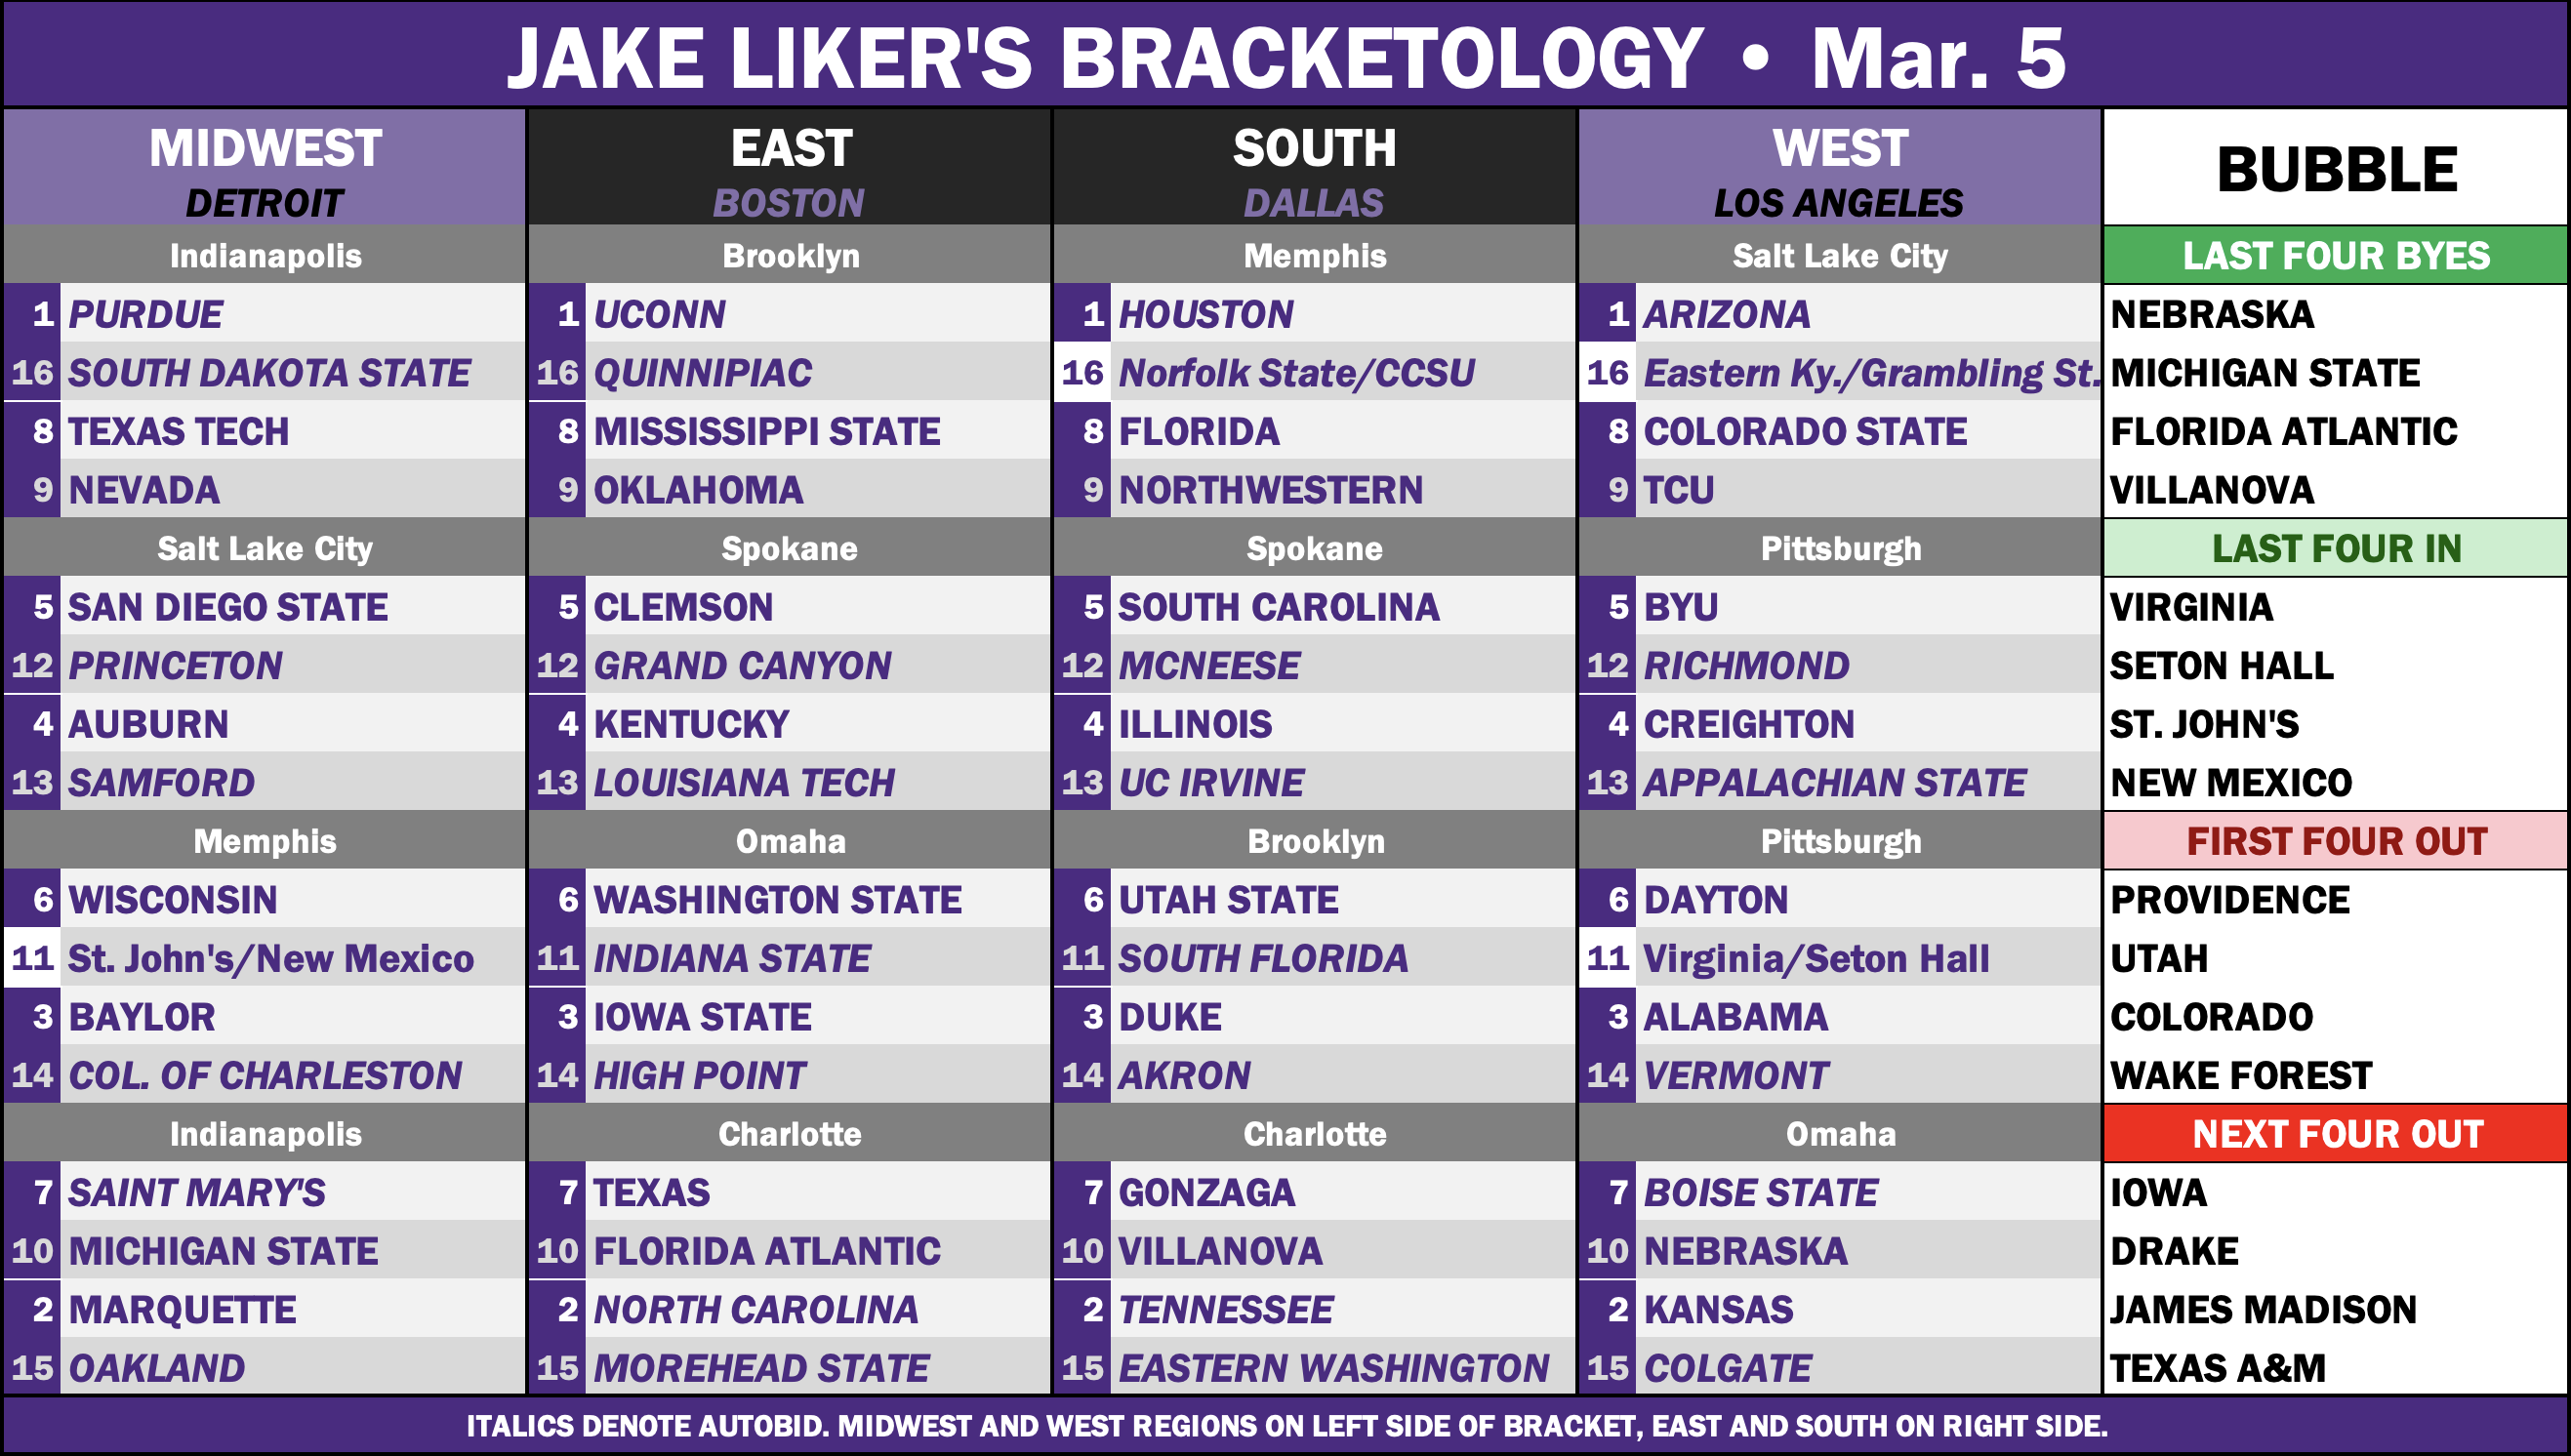 Bracketology graphic for 3/5/24. Seed list available in text format at bottom.